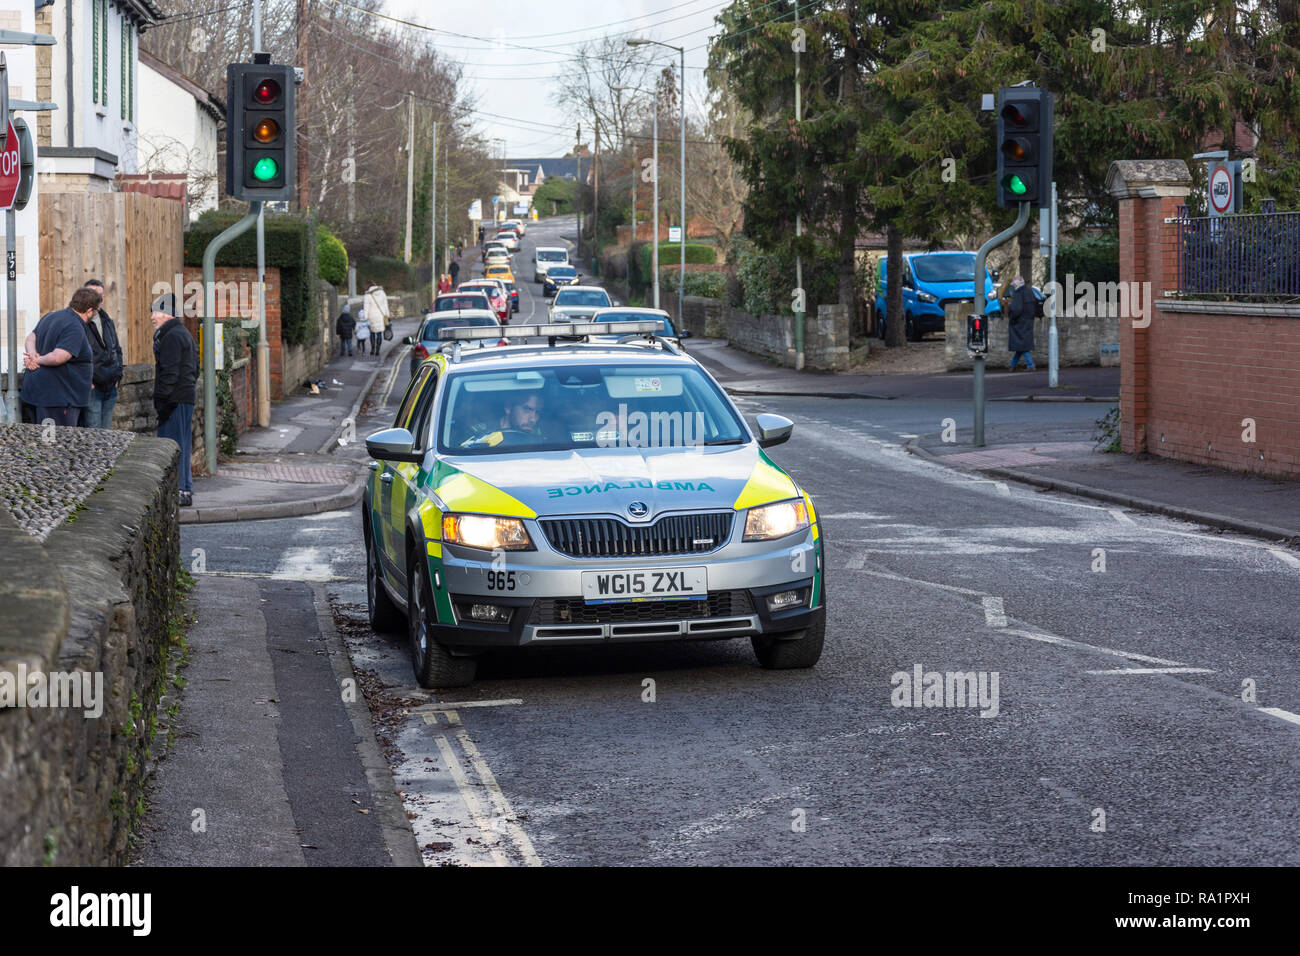 A fast response ambulance car parked near traffic lights after an emergency has been cleared Stock Photo